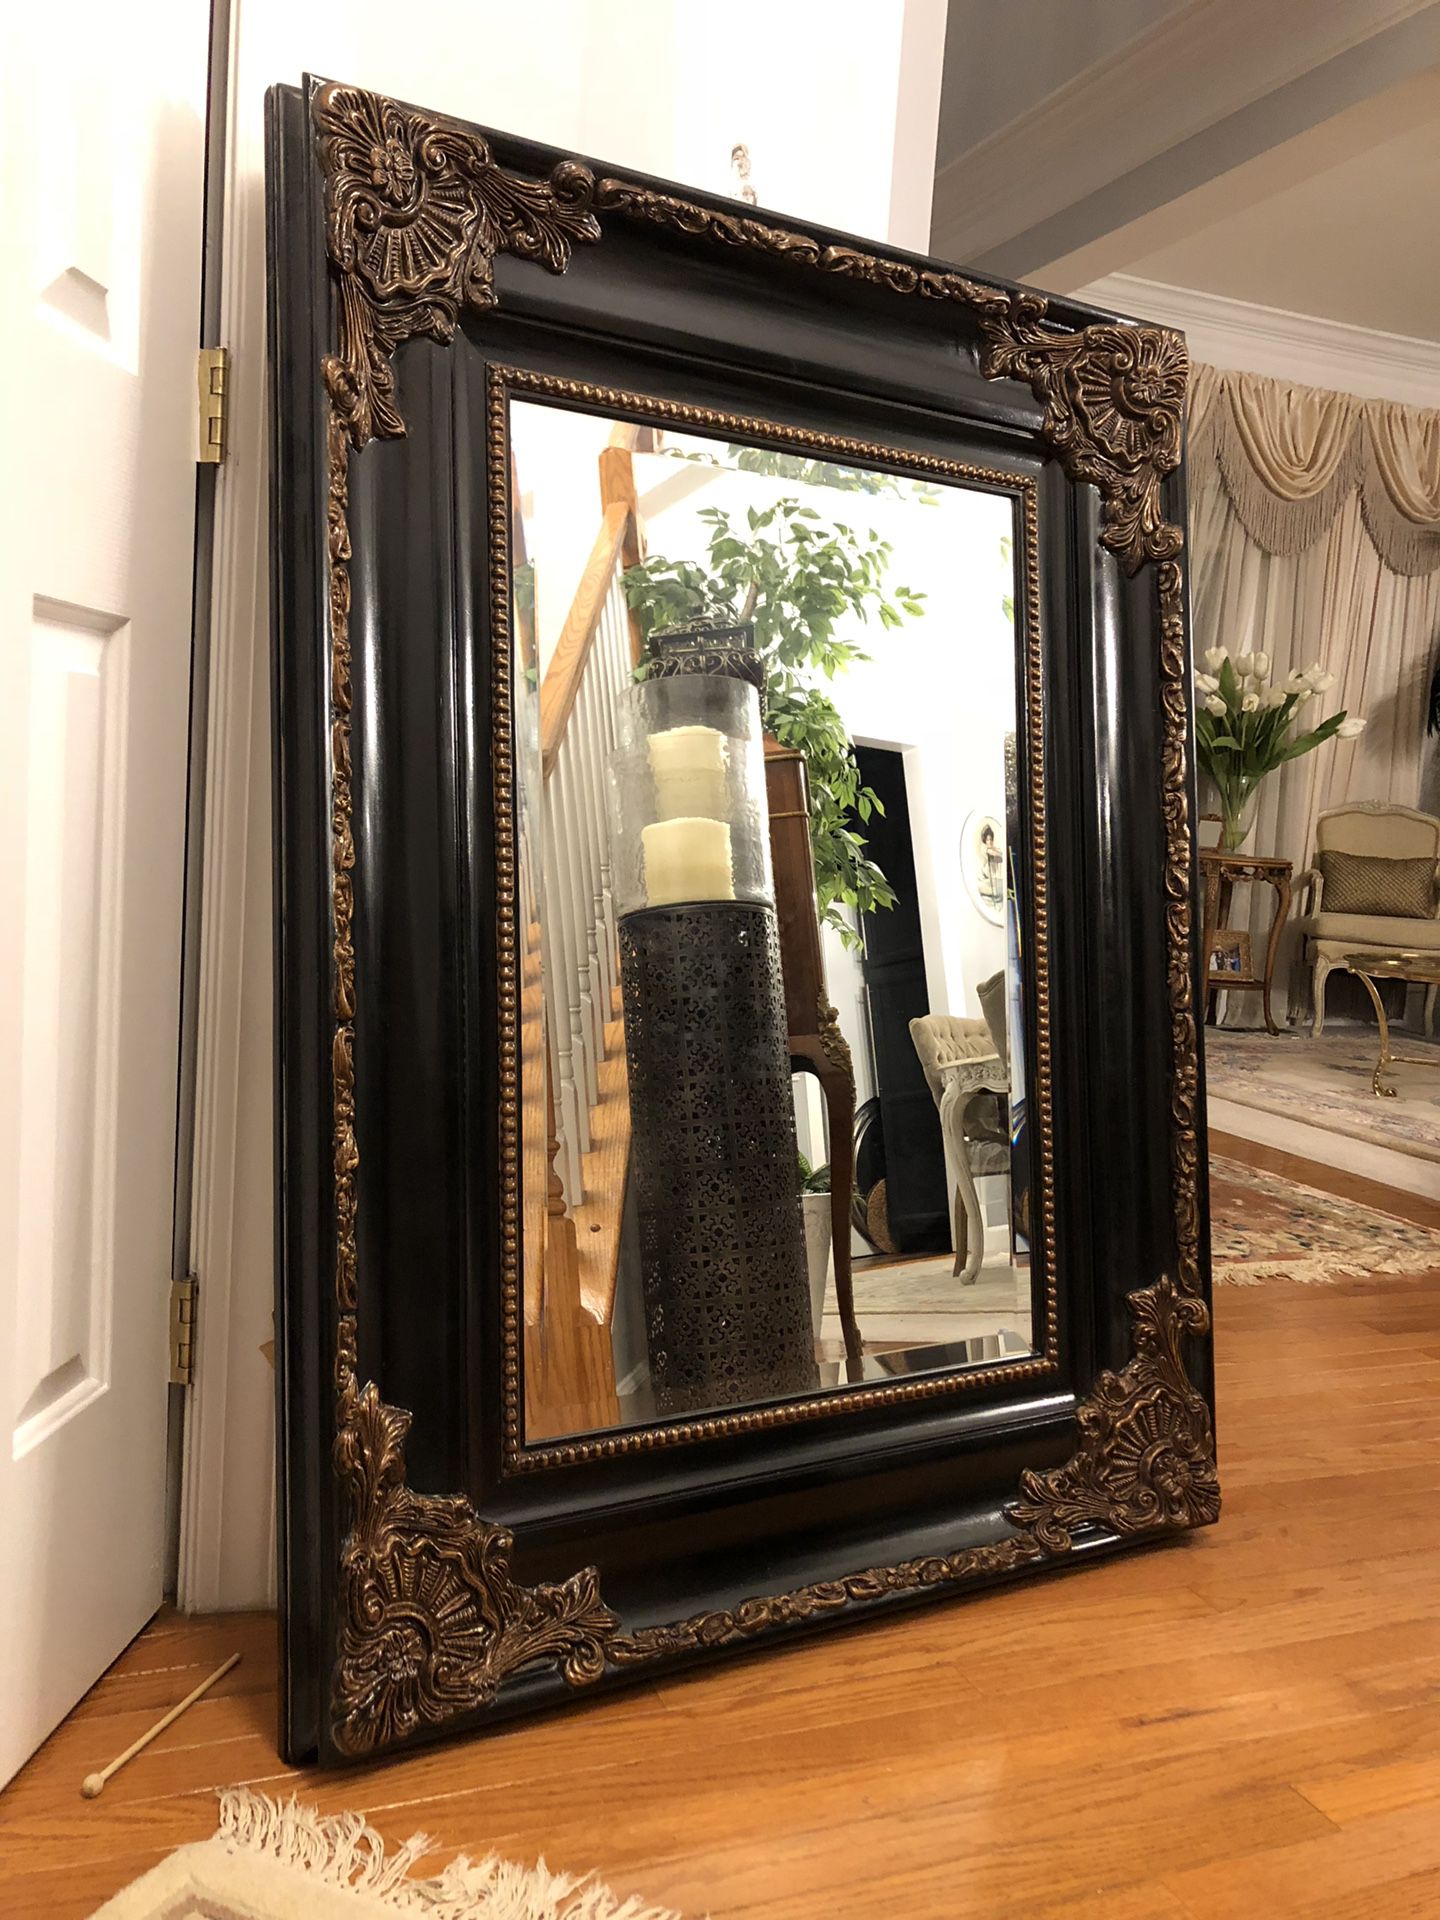 49”X37” Large Black Antique Style Wooden Mirror